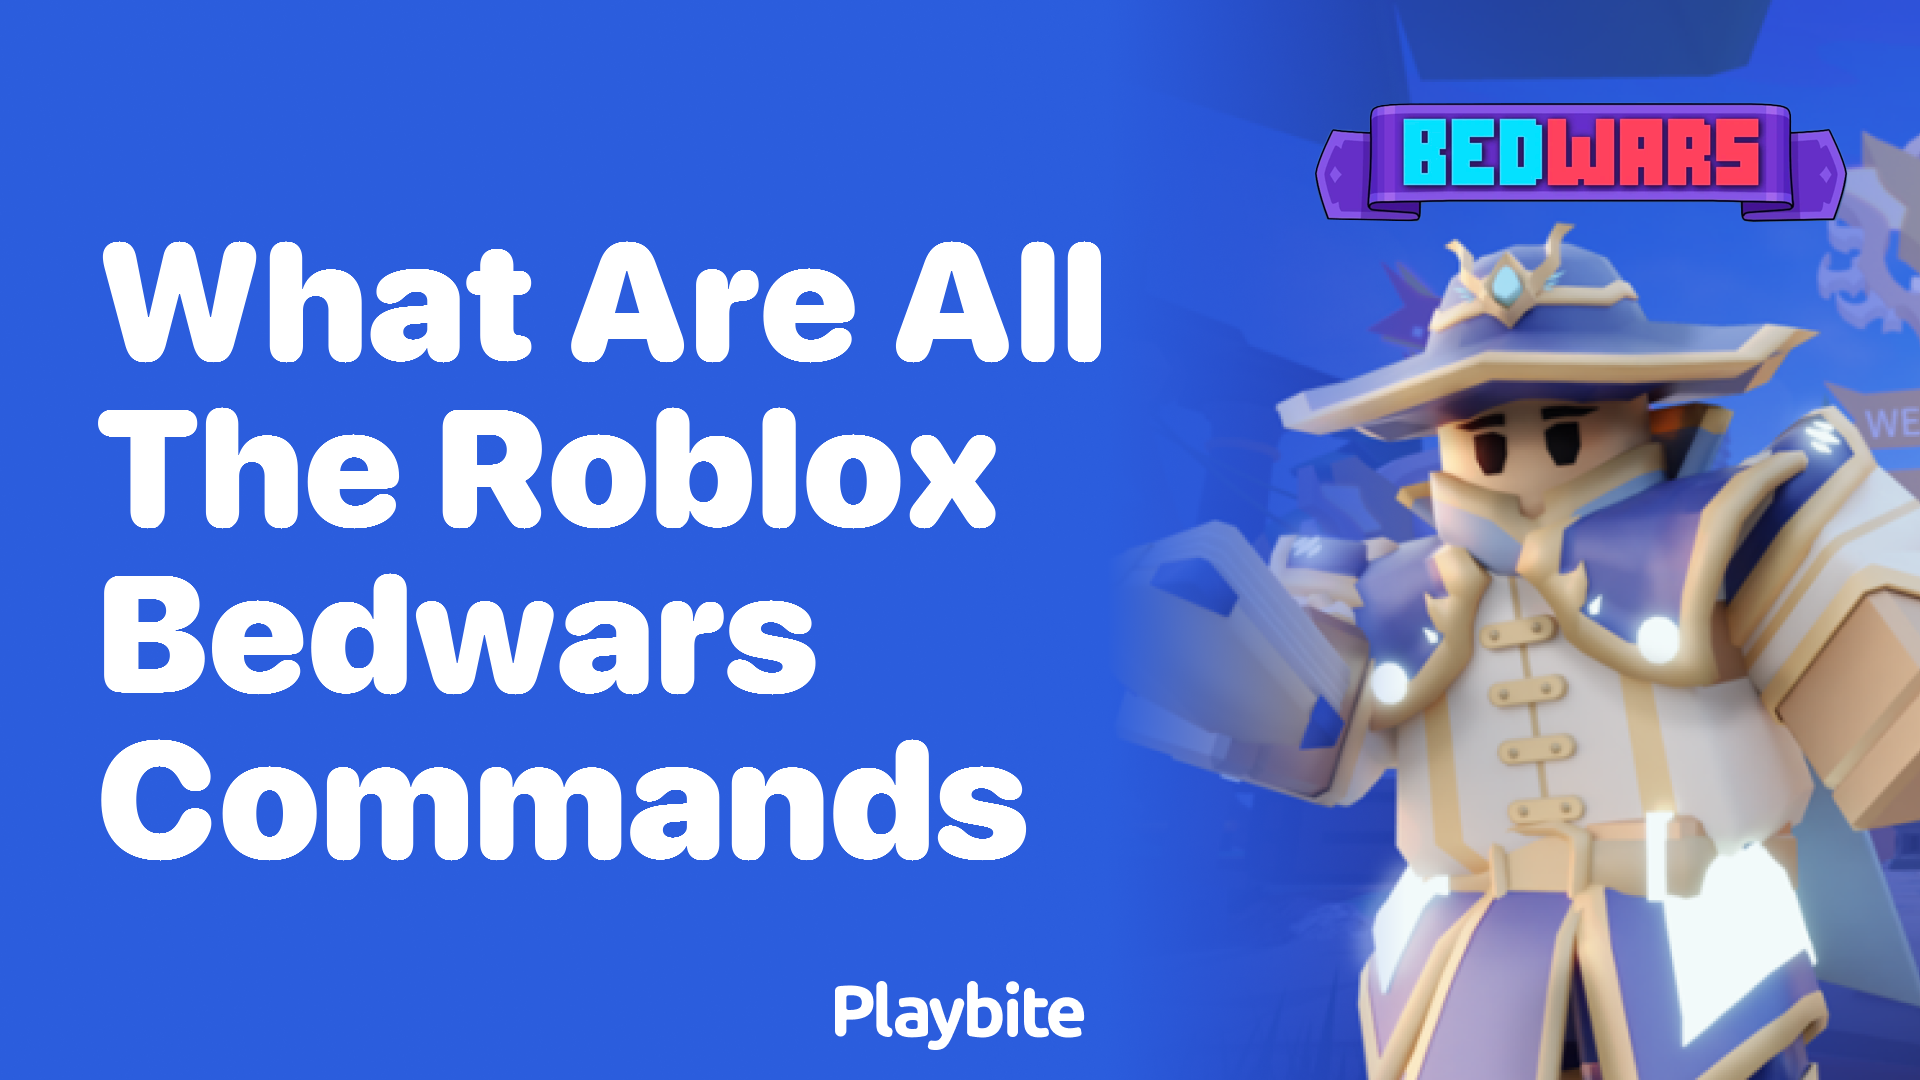 What are all the Roblox Bedwars Commands?